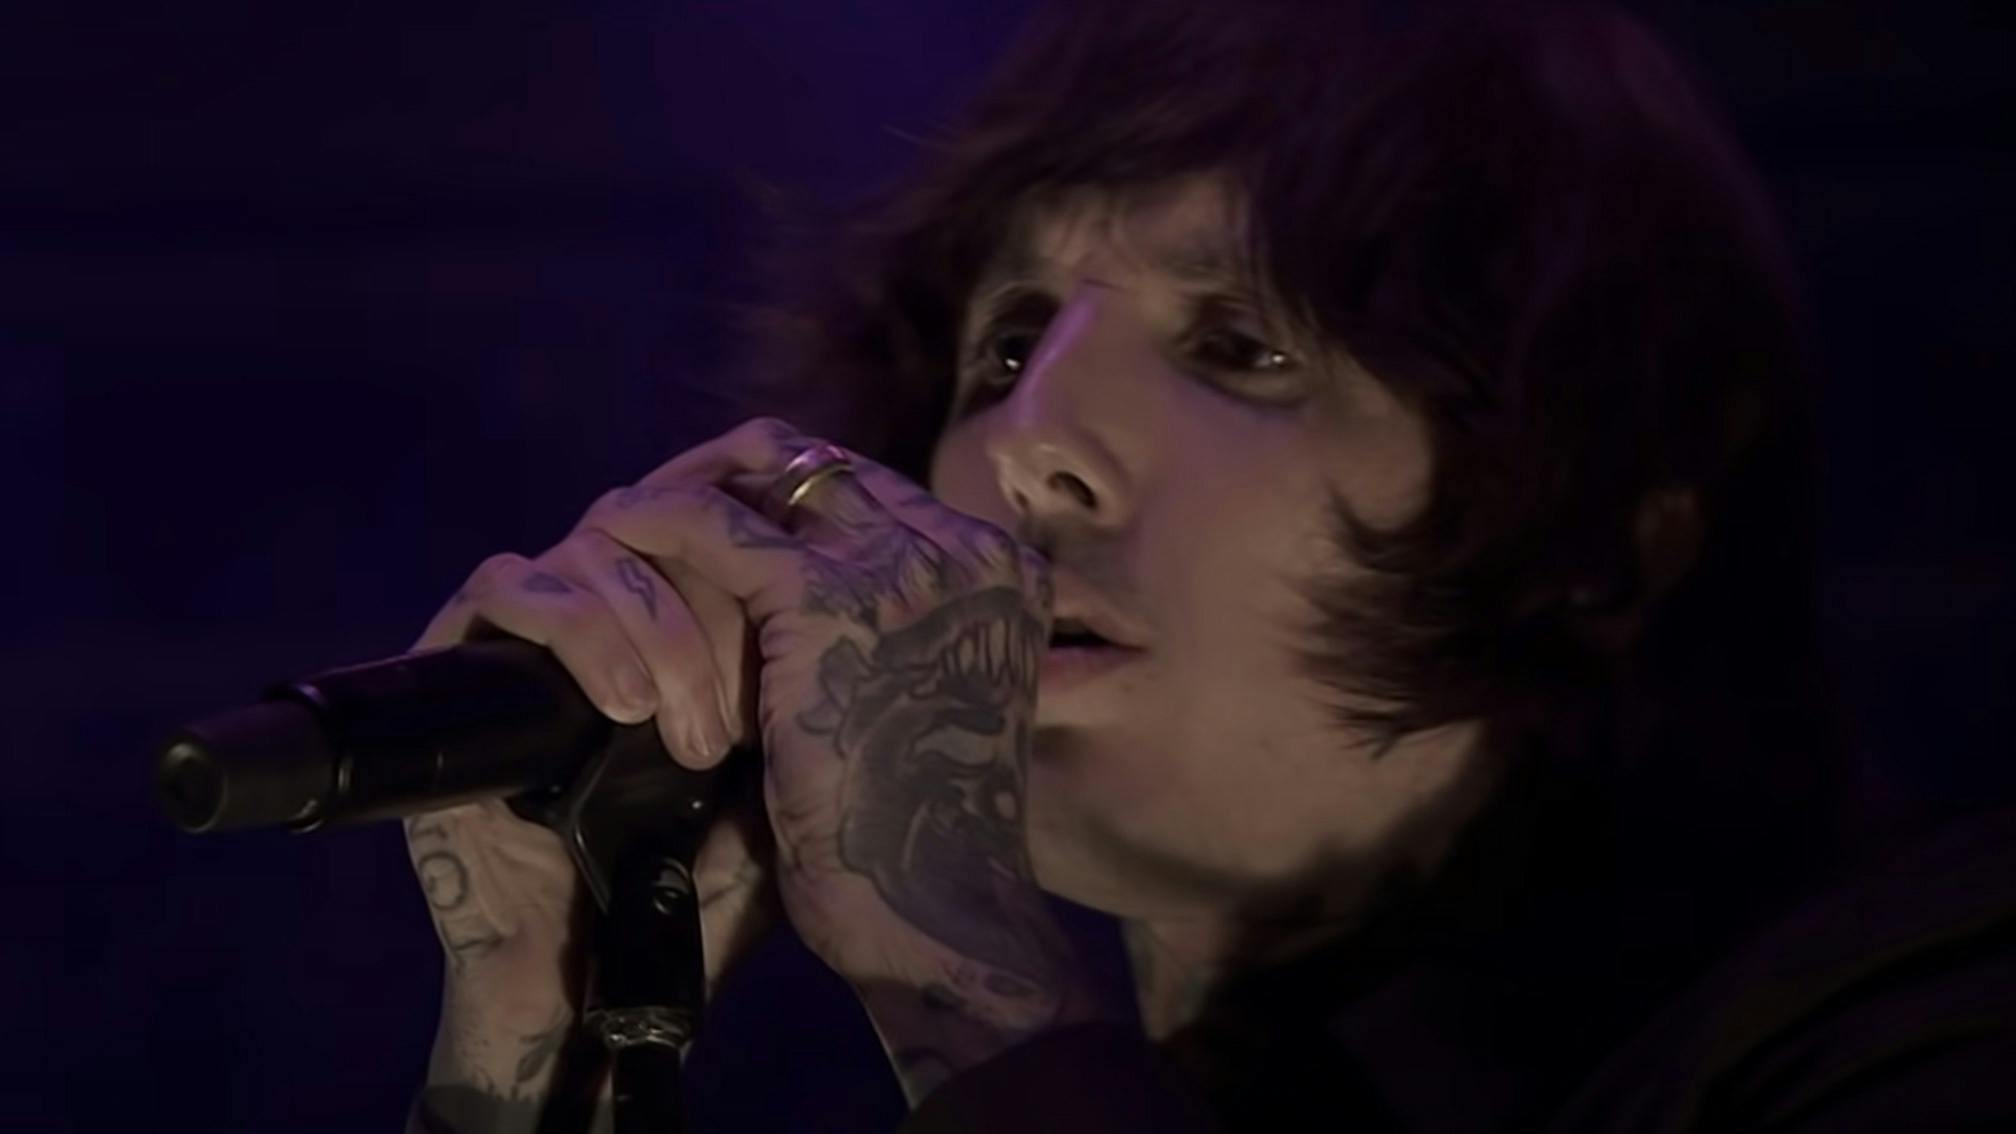 Bring Me The Horizon's Live At The Royal Albert Hall to hit streaming services tomorrow